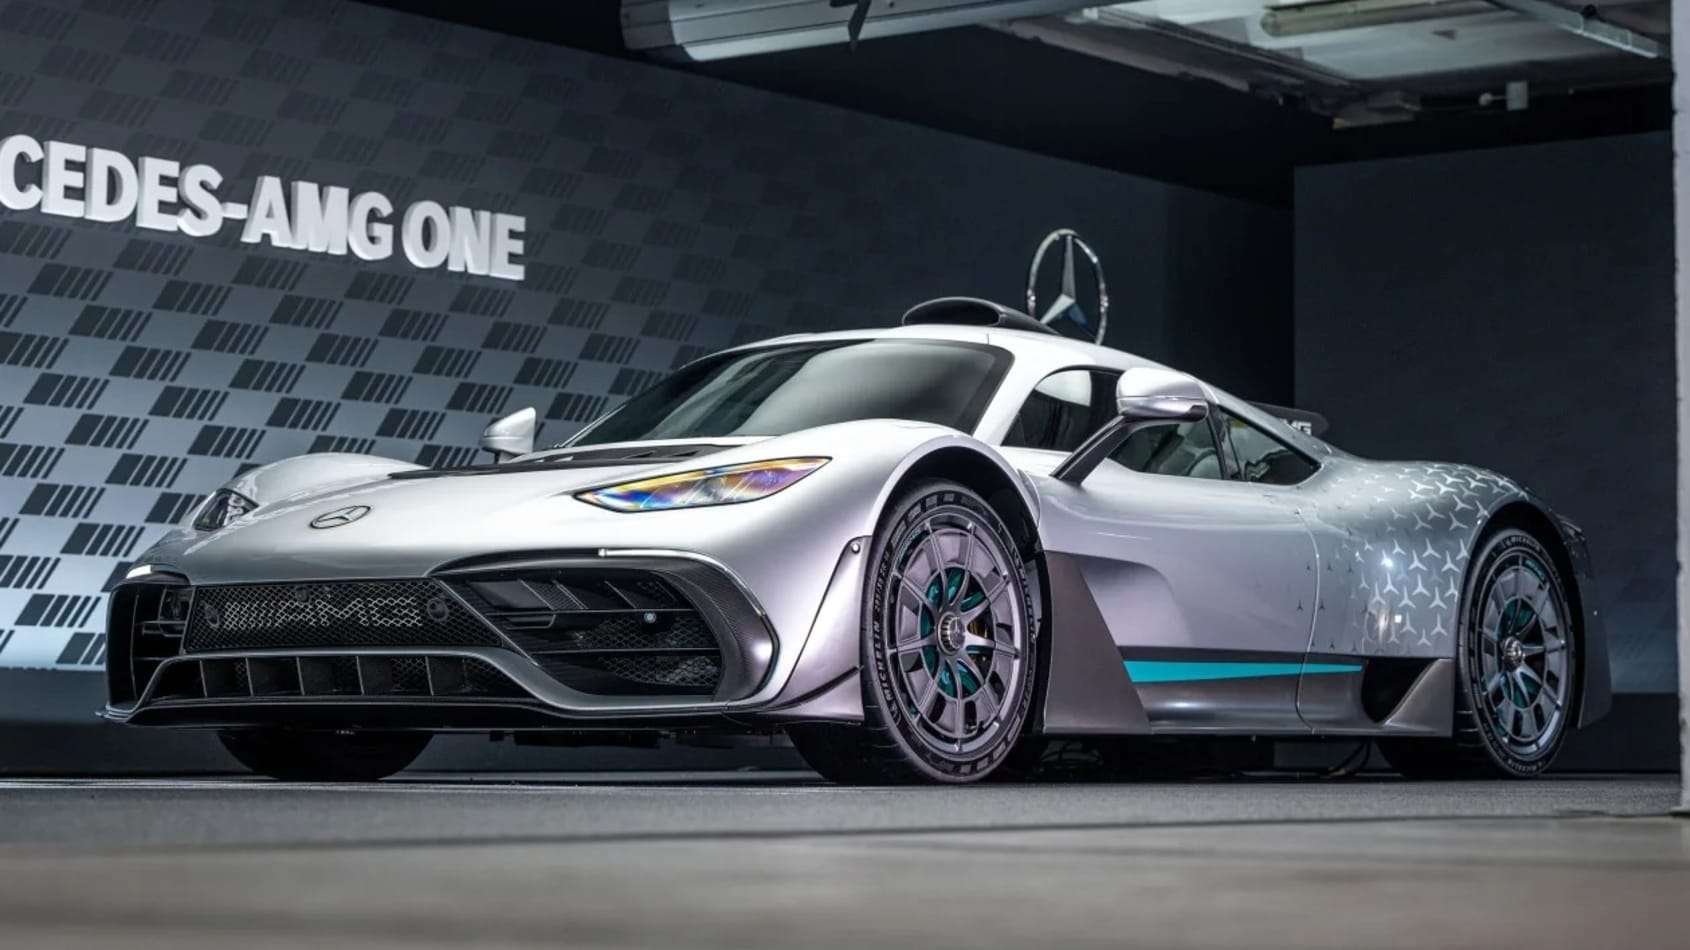 Mercedes-AMG One - Goodwood Festival of Speed 2022